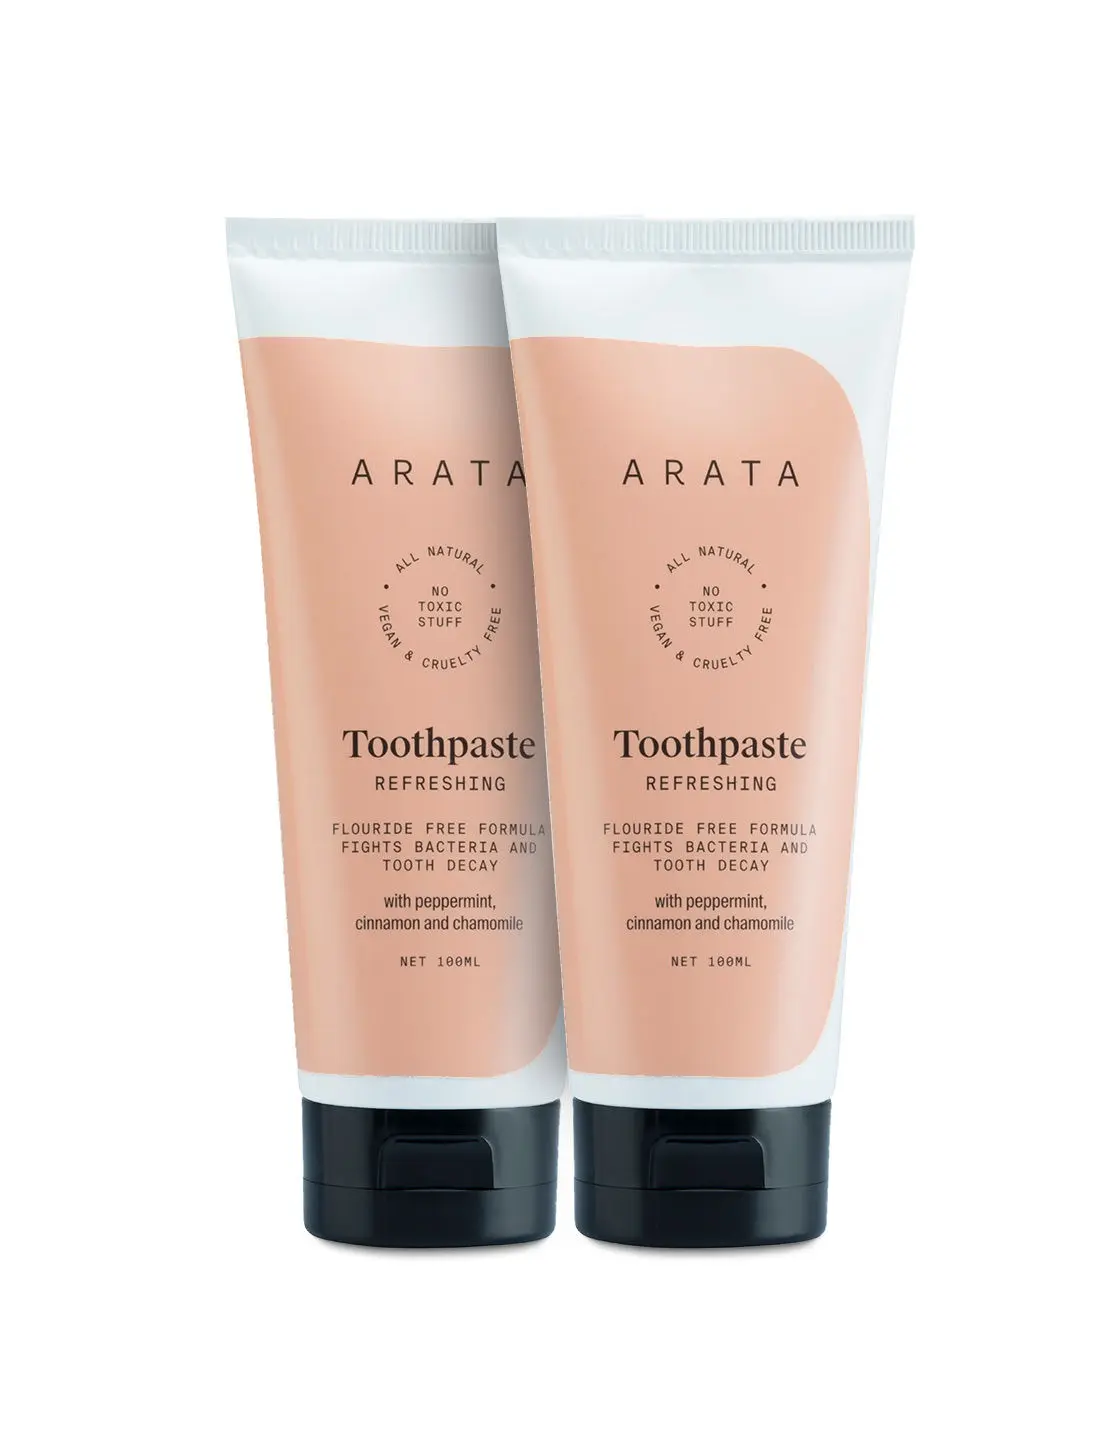 Arata Natural Refreshing Toothpaste with Peppermint ,Cinnamon & Chamomile || All Natural ,Vegan & Cruelty Free || Flouride Free Formula Fights Bacteria & Tooth Decay -(Pack of 2 )-100 ml Each